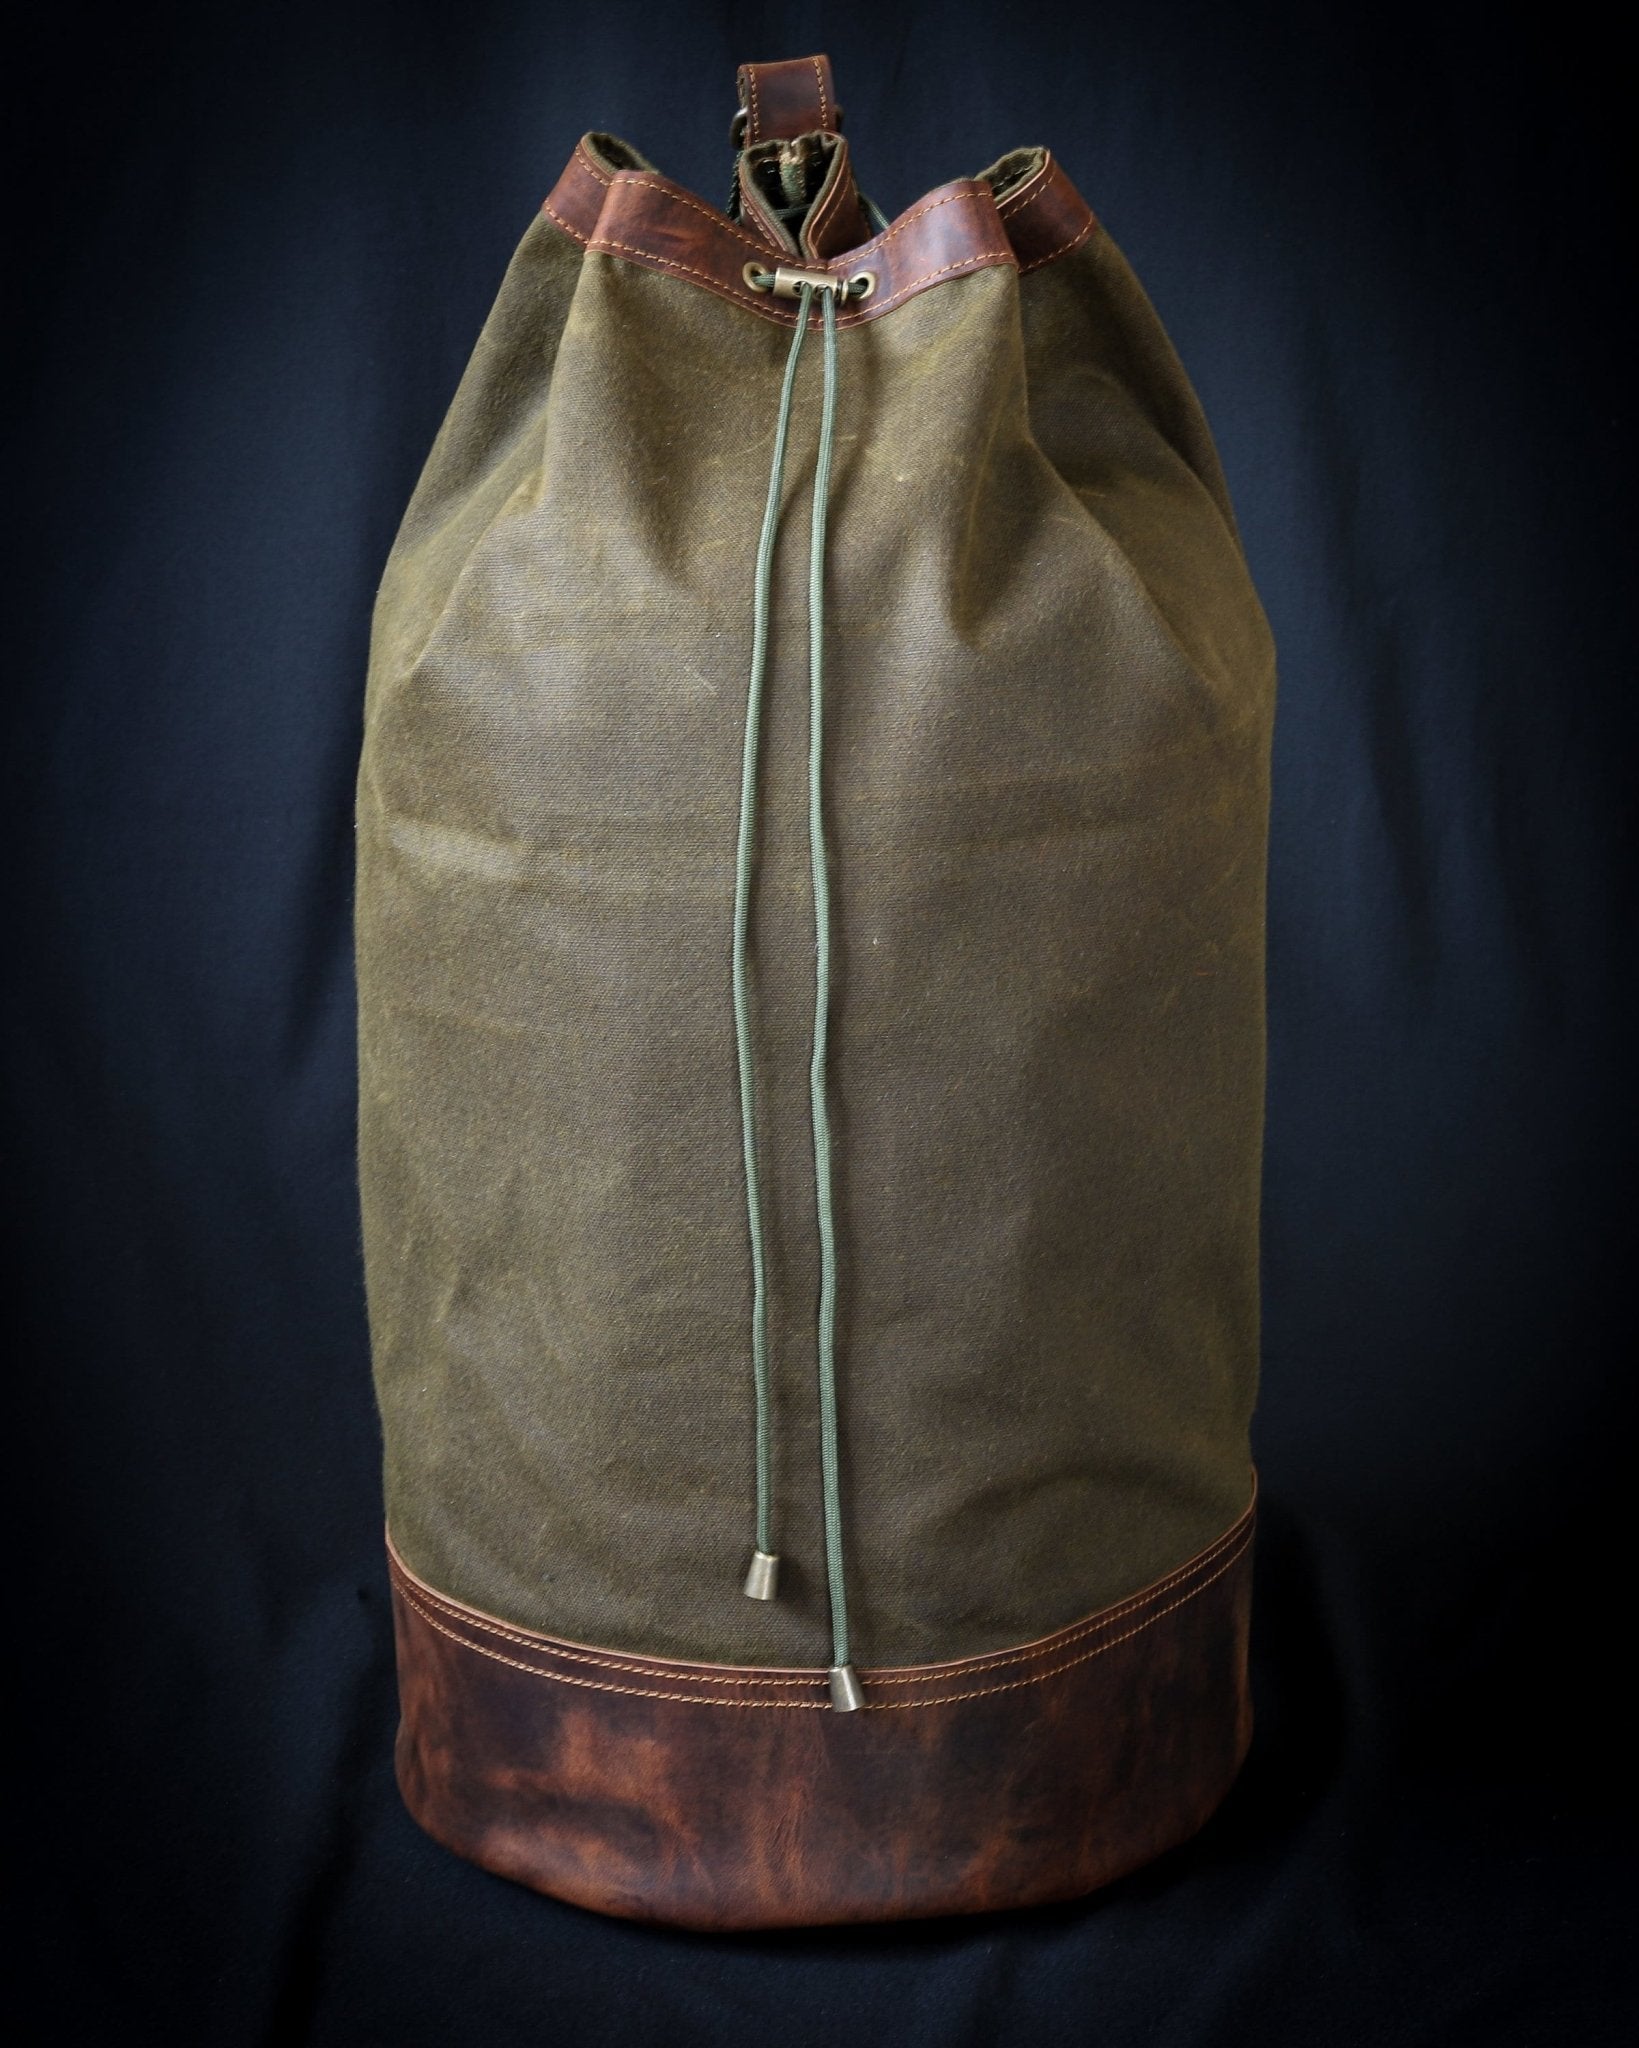 Handmade Genuine Green Leather and Waxed Canvas duffle Backpack for Travel, Camping | 40 Liters | Duffel Bag, large duffle backpack  99percenthandmade   